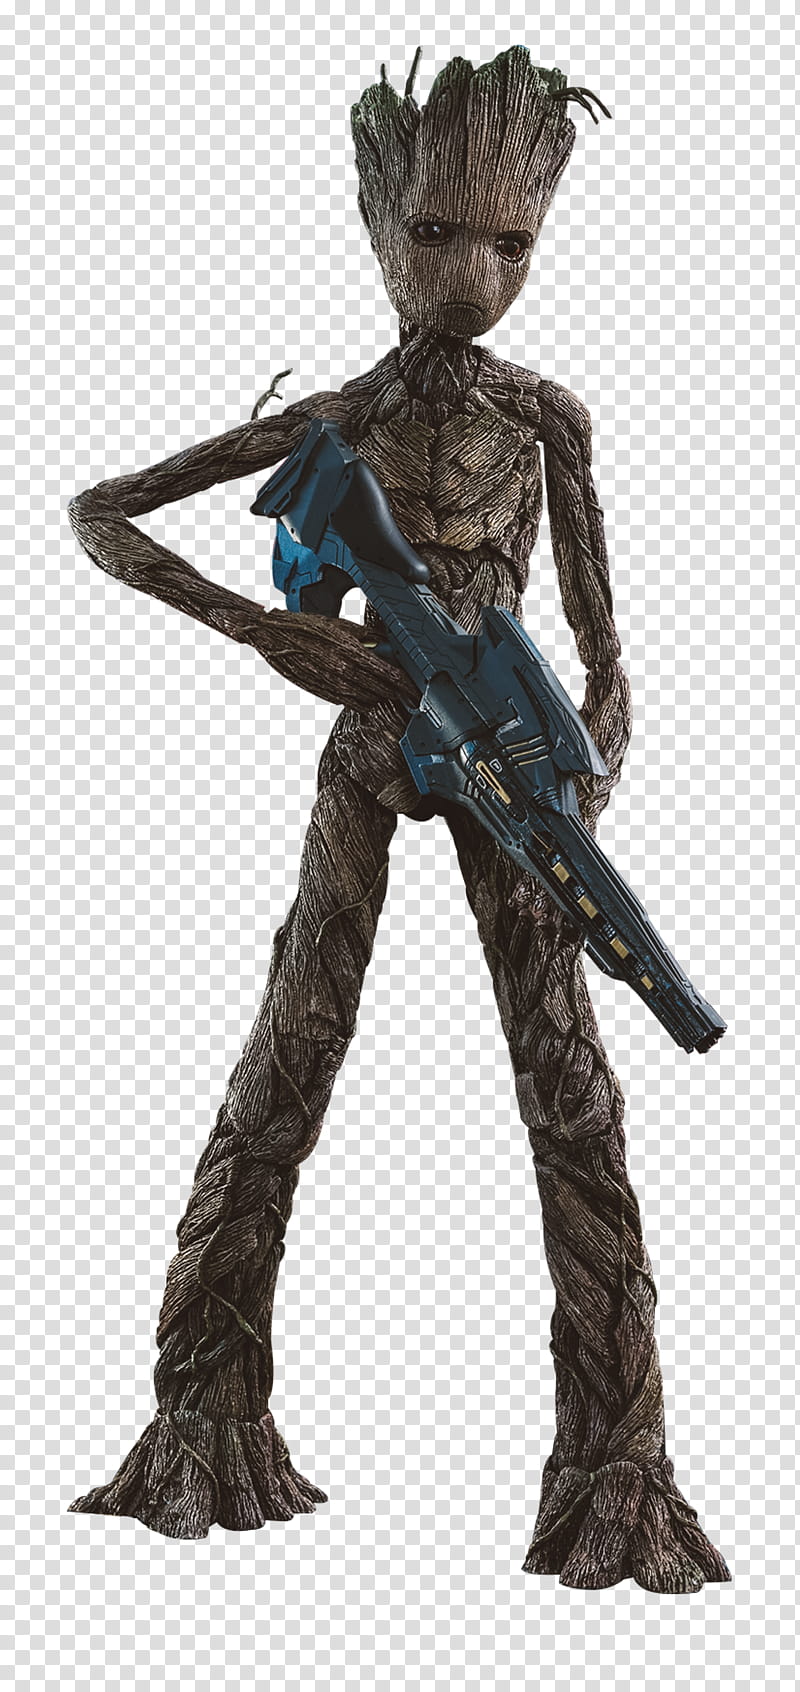 Teenage Groot transparent background PNG clipart